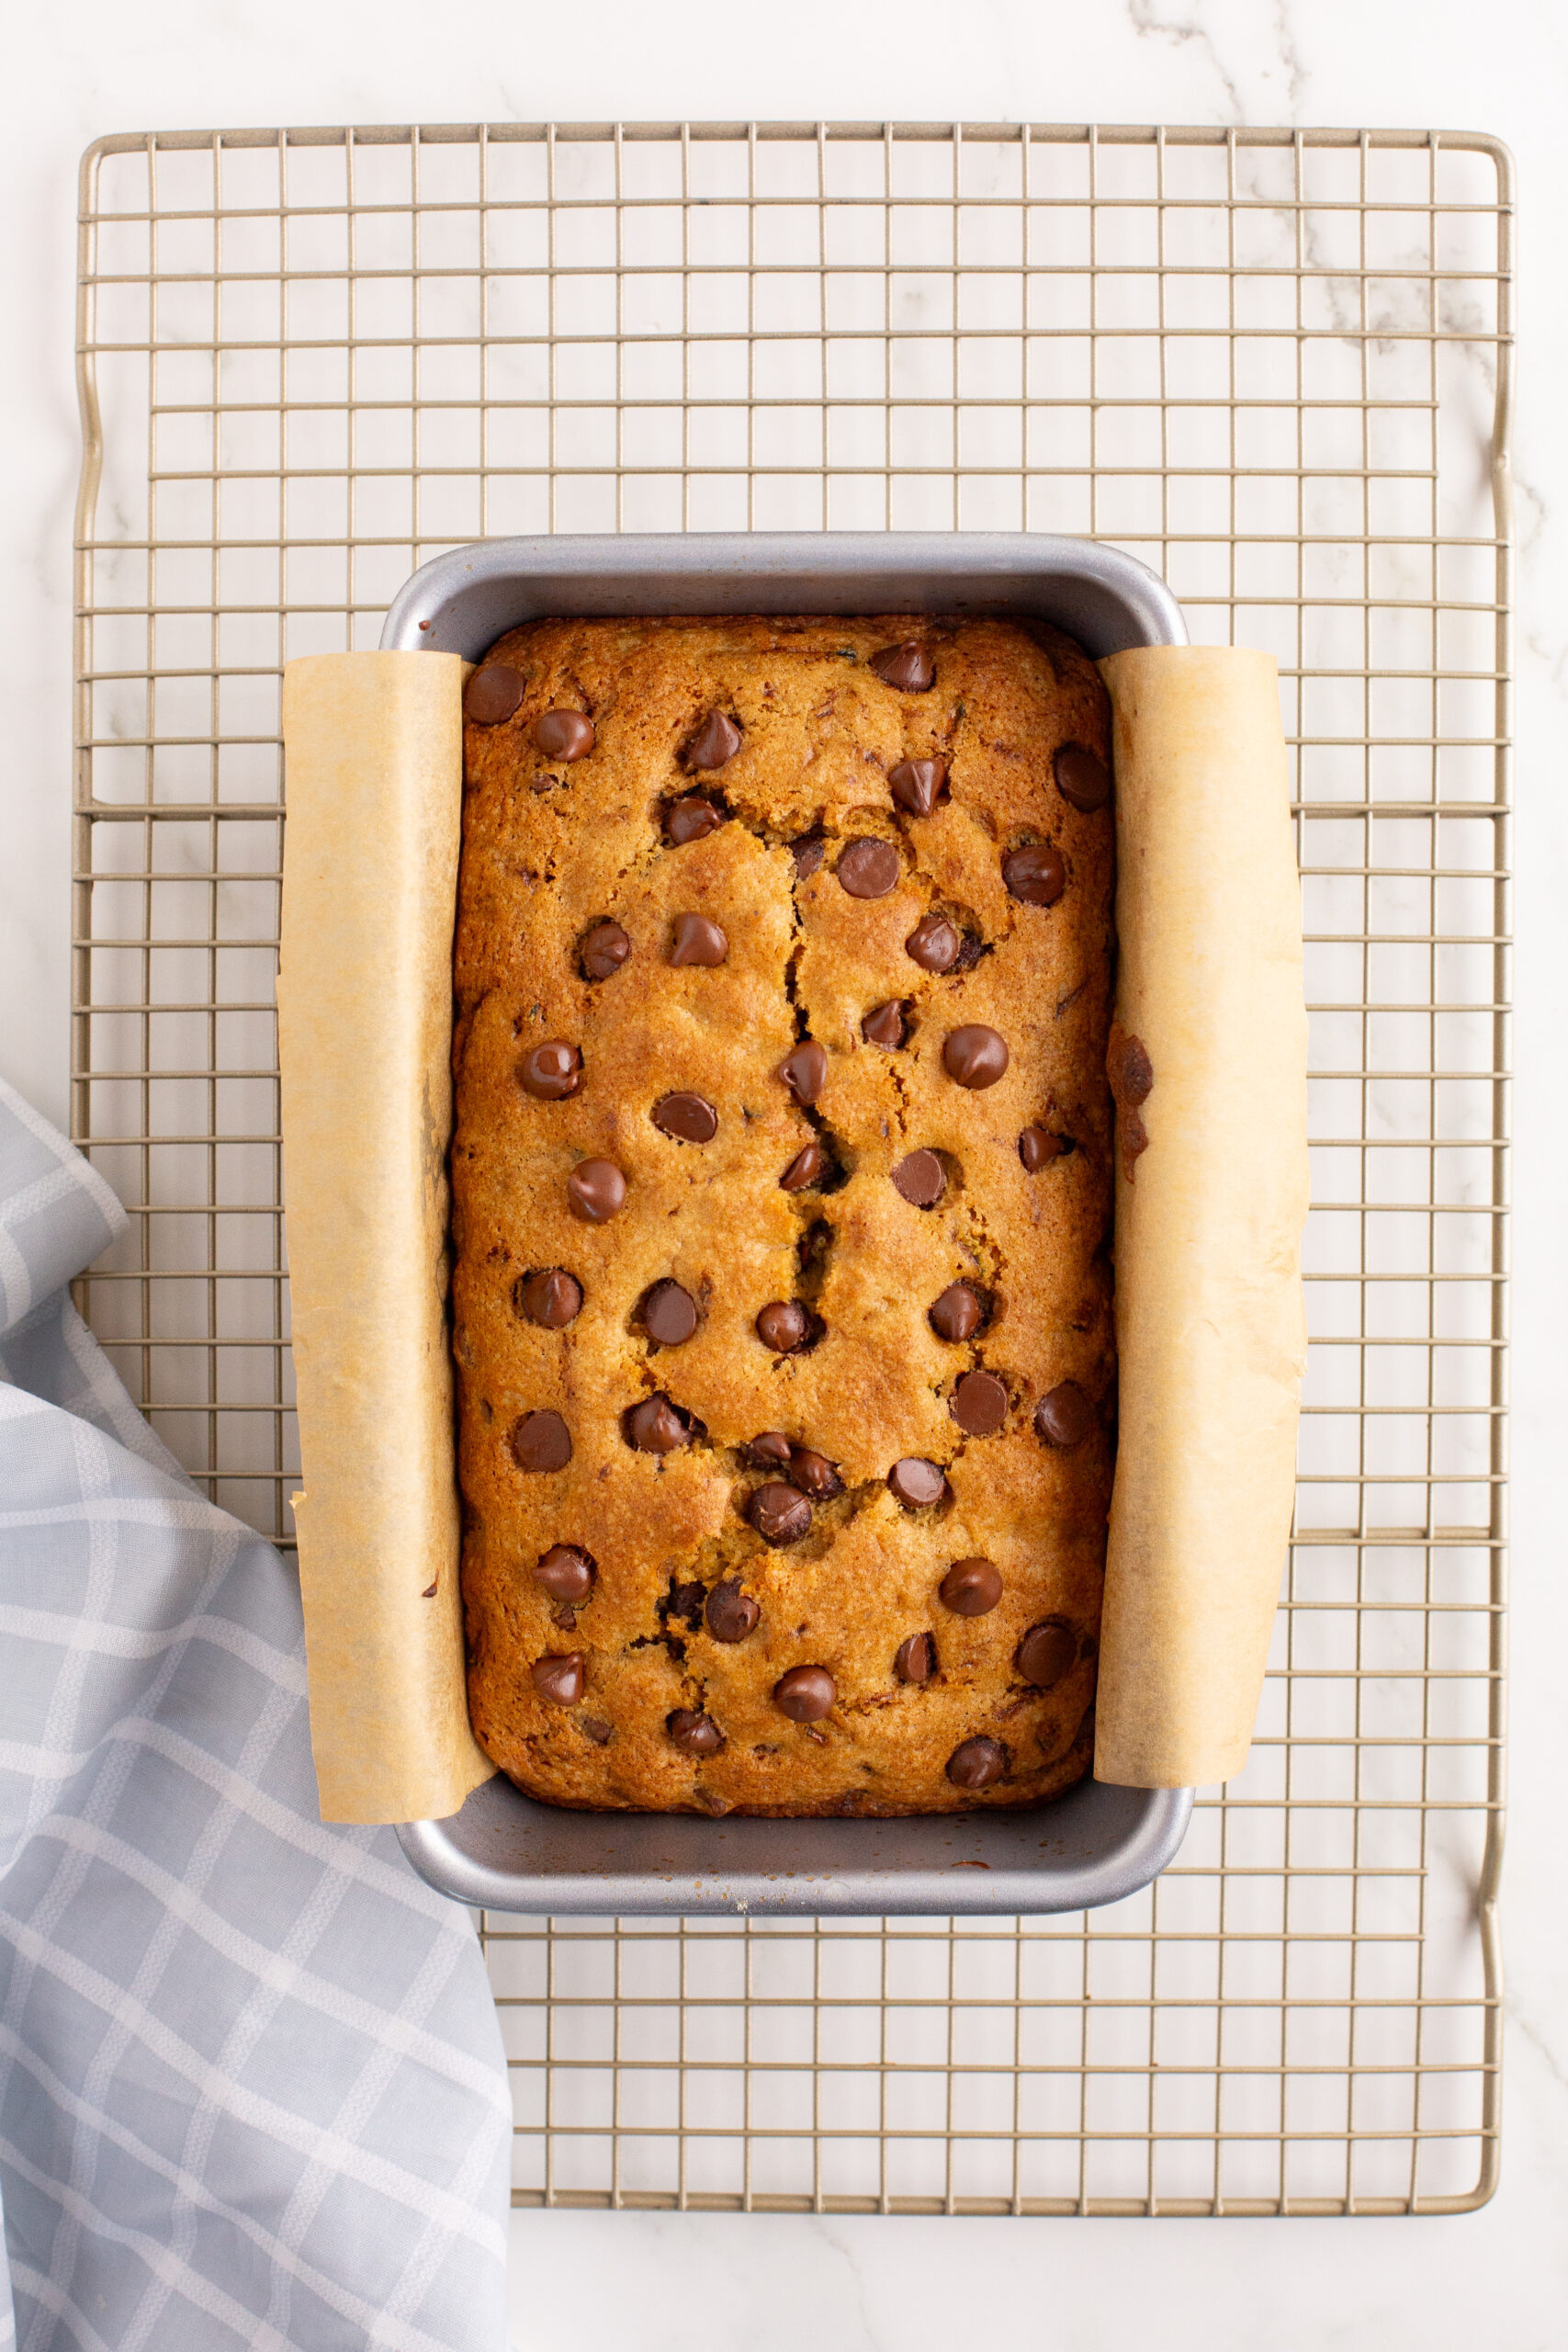 Overhead image of chocolate chip zucchini bread in a baking pan.